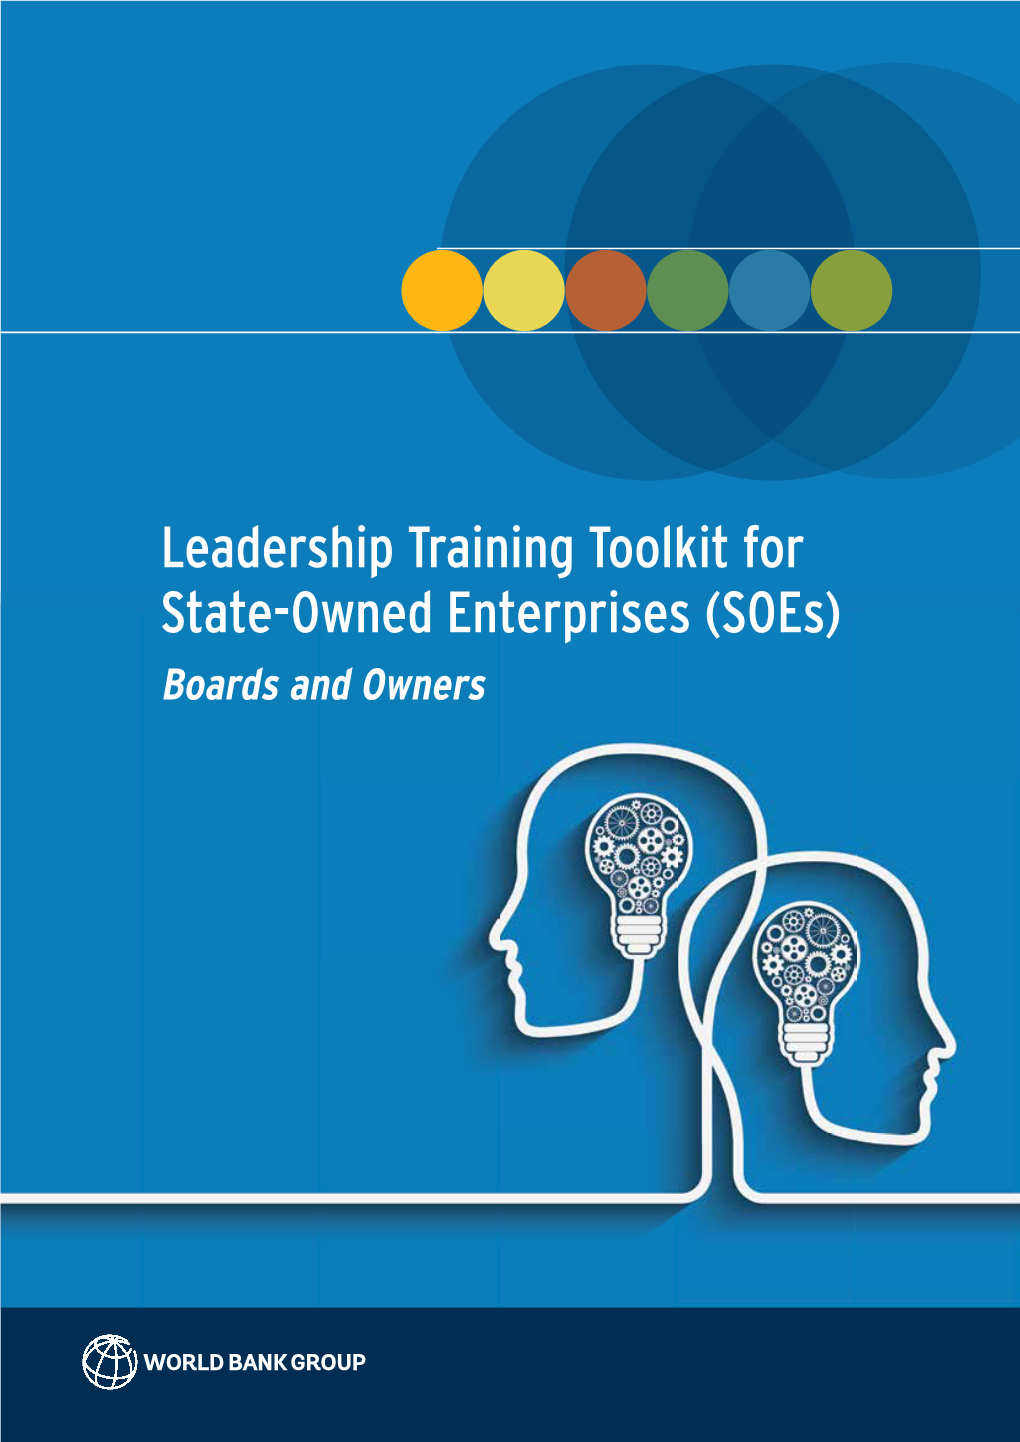 Leadership Training Toolkit for State-Owned Enterprises (Soes) Boards and Owners Ii Leadership Training Toolkit for State-Owned Enterprises (Soes)